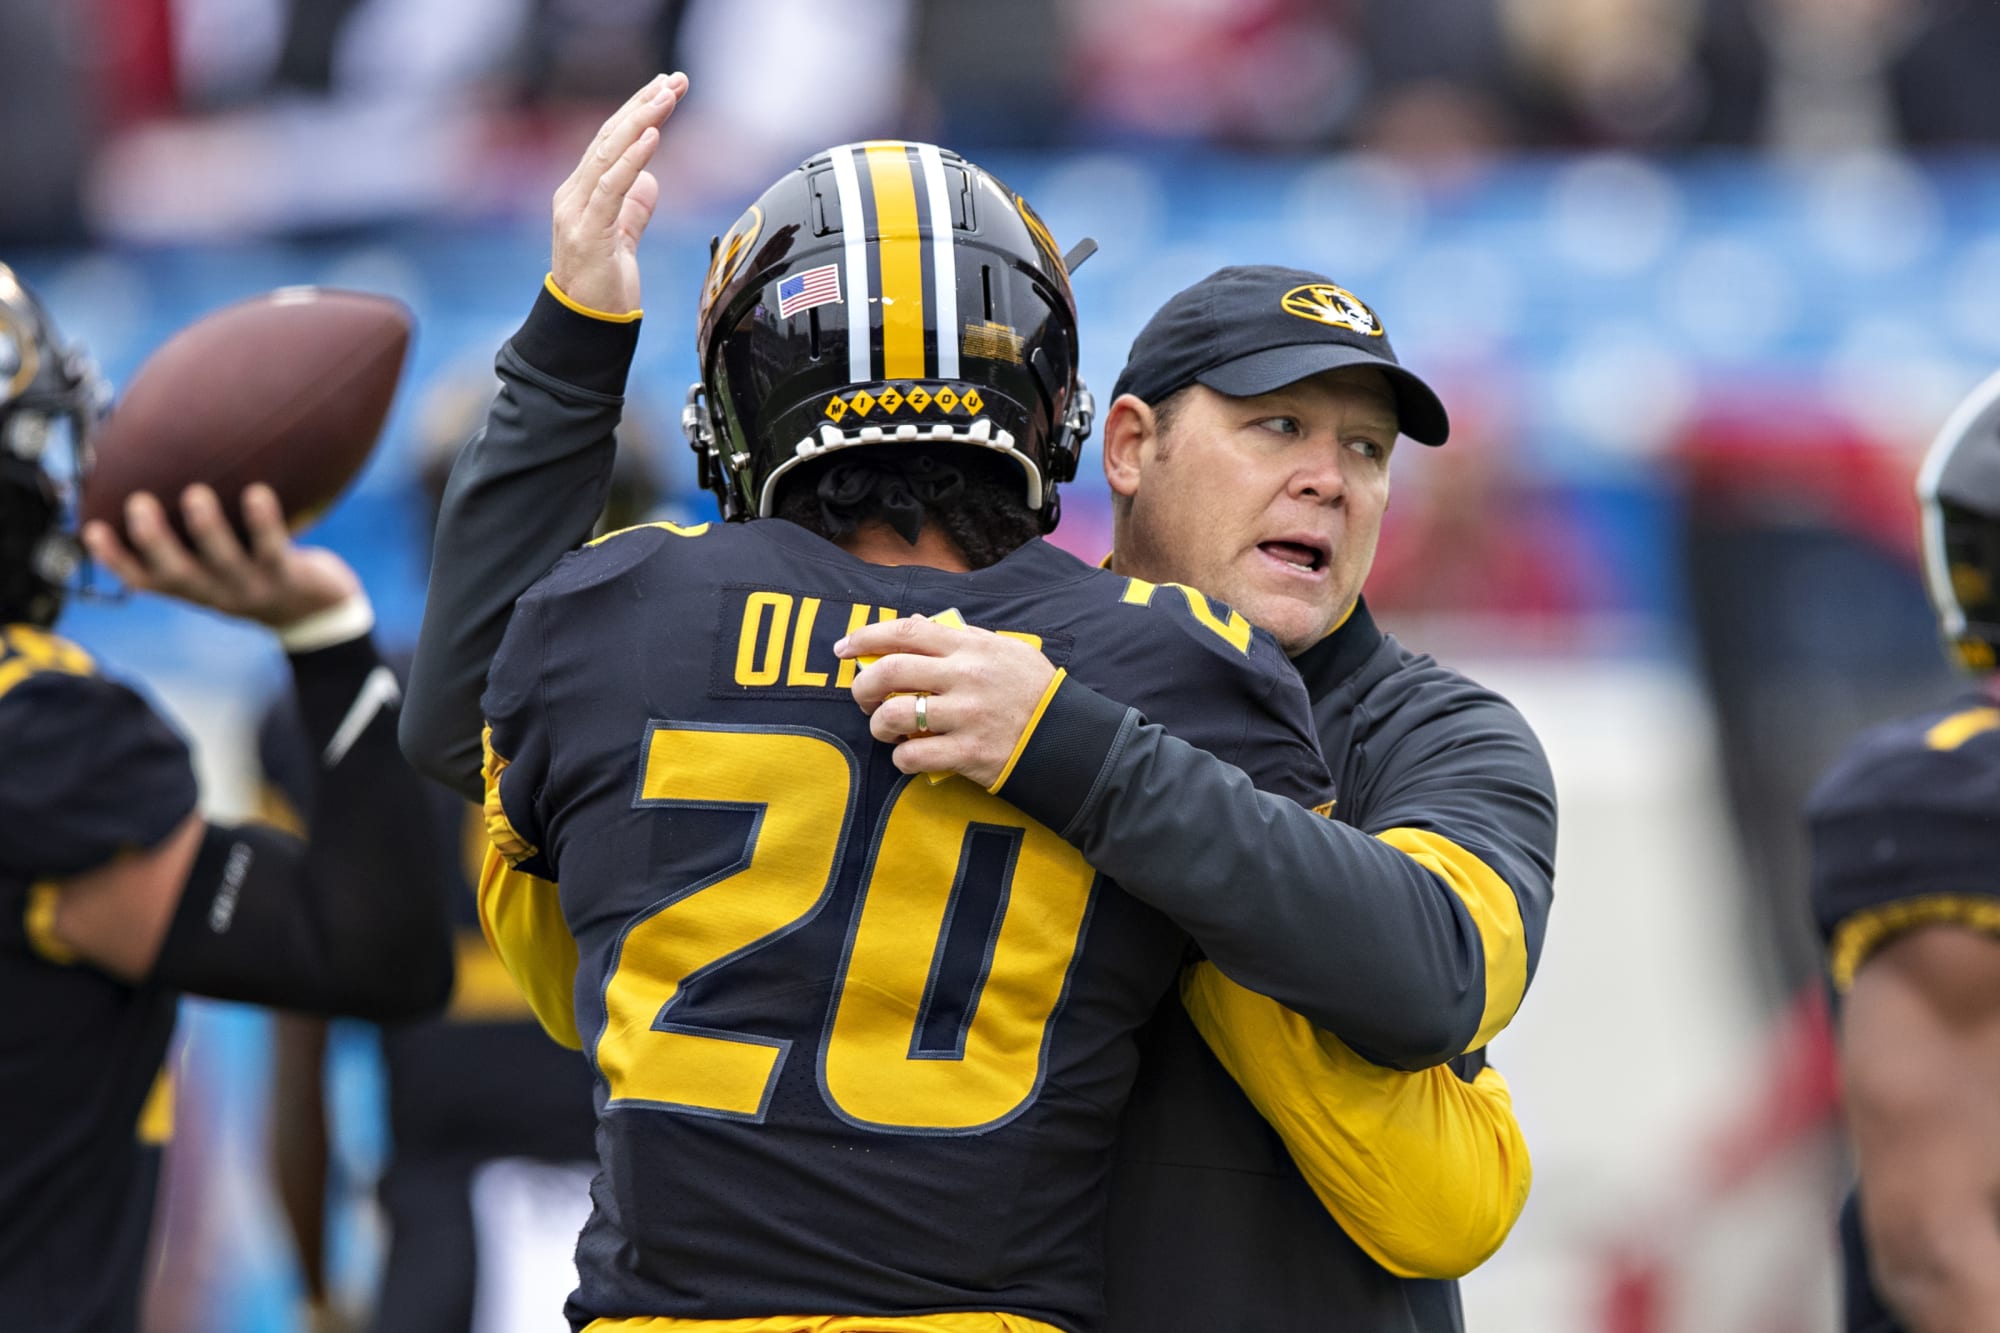 Mizzou football comes from behind to beat Arkansas